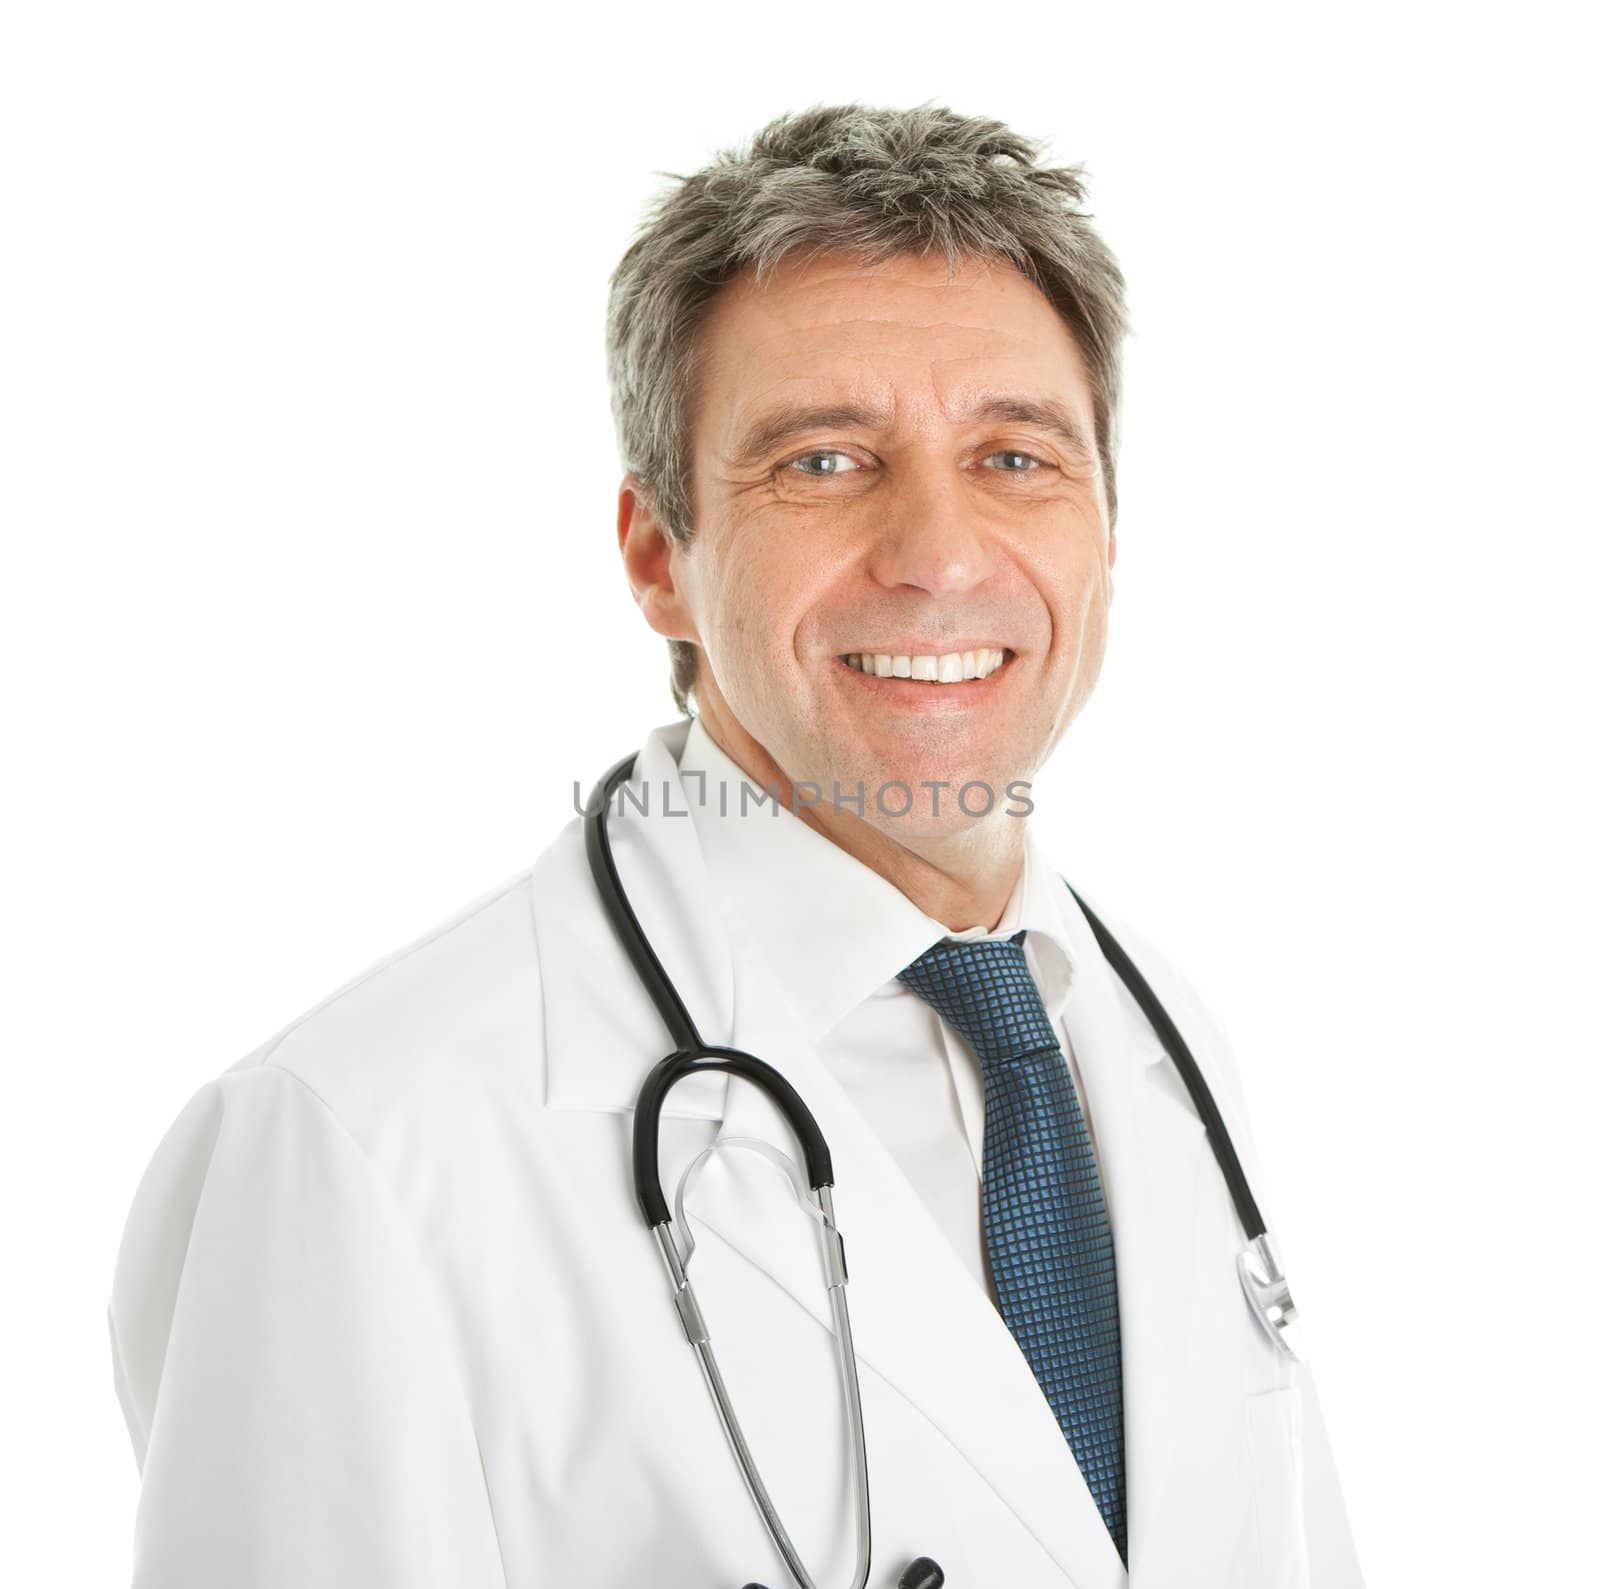 Smiling medical doctor man with stethoscope. Isolated on white